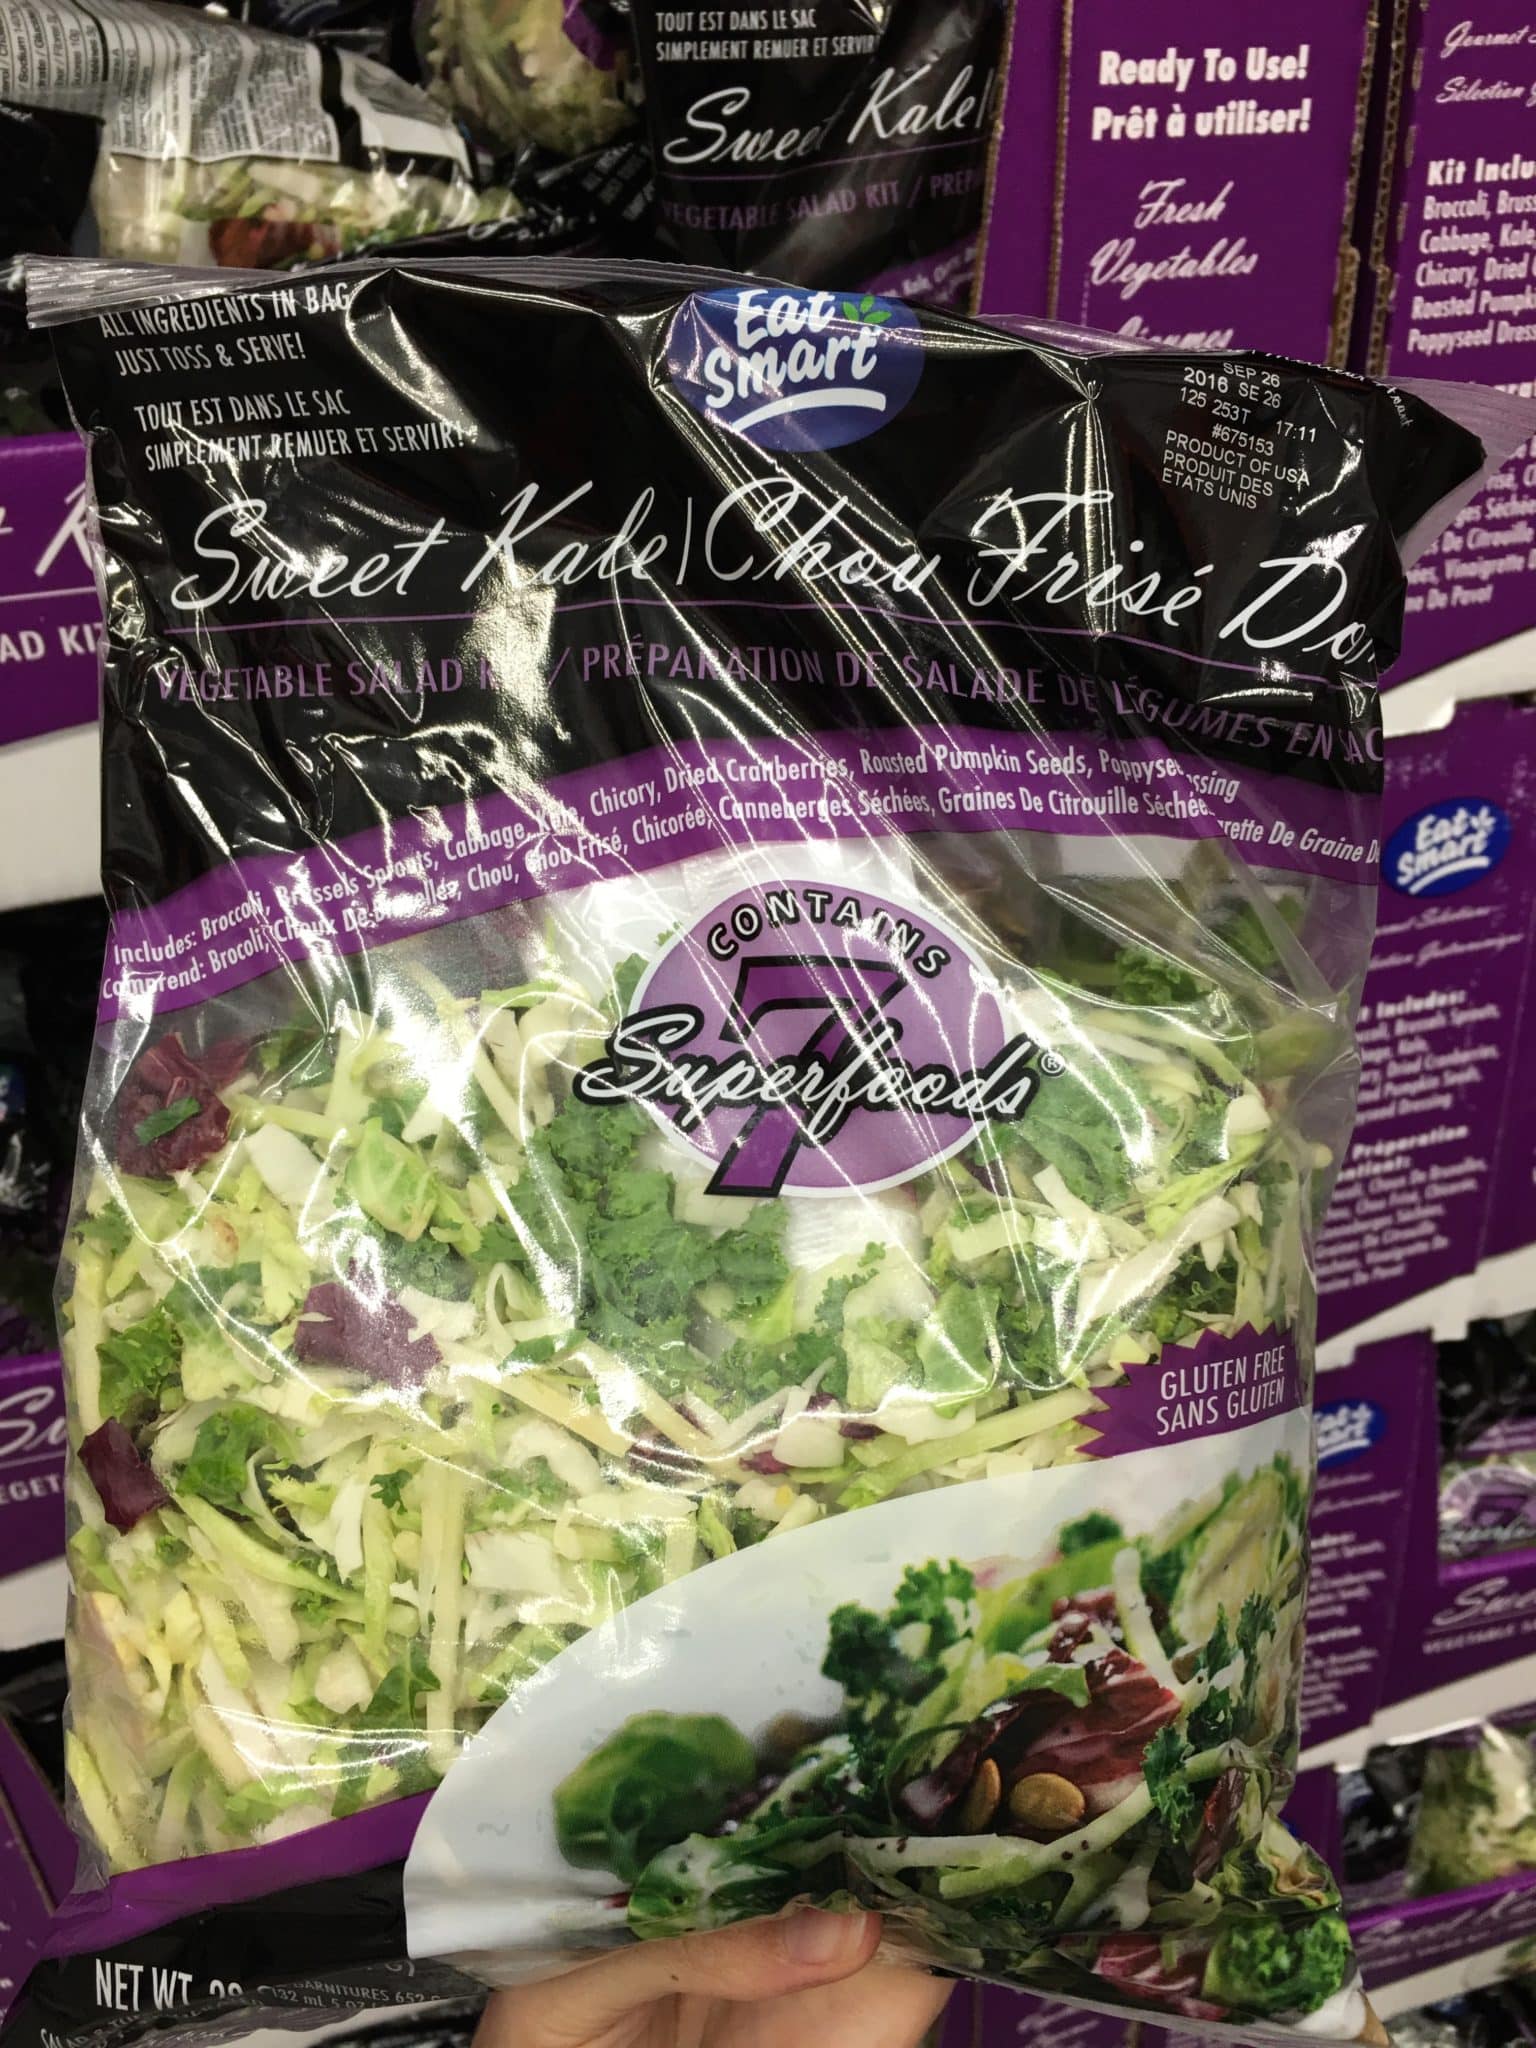 Kale Superfood Salad from Costco